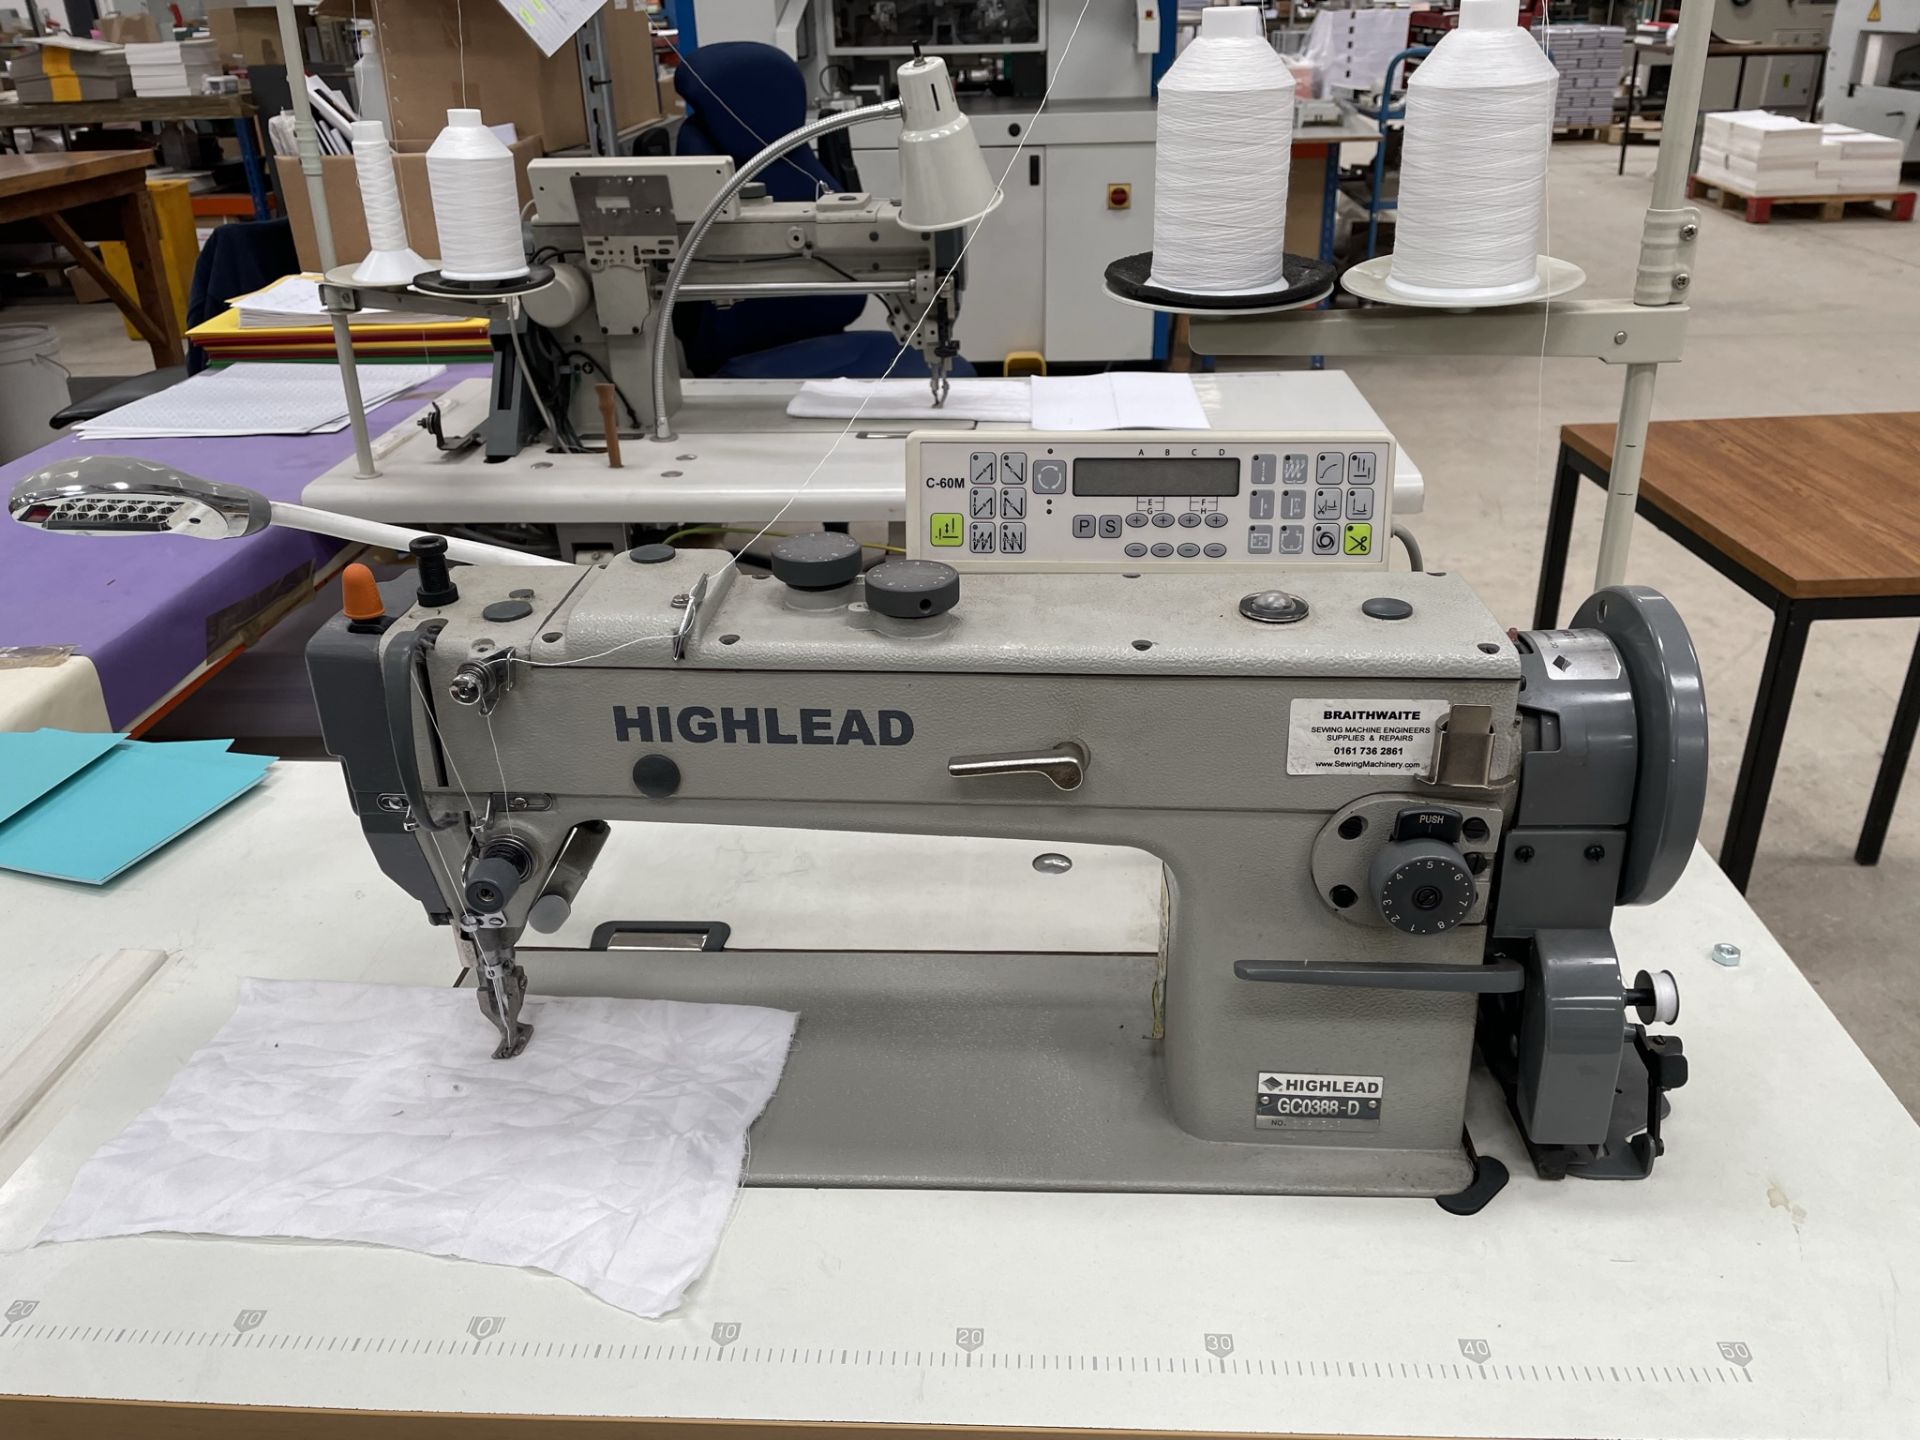 Highlead GC0388-DIndustrial Flat Bed Sewing Machine - Image 2 of 5